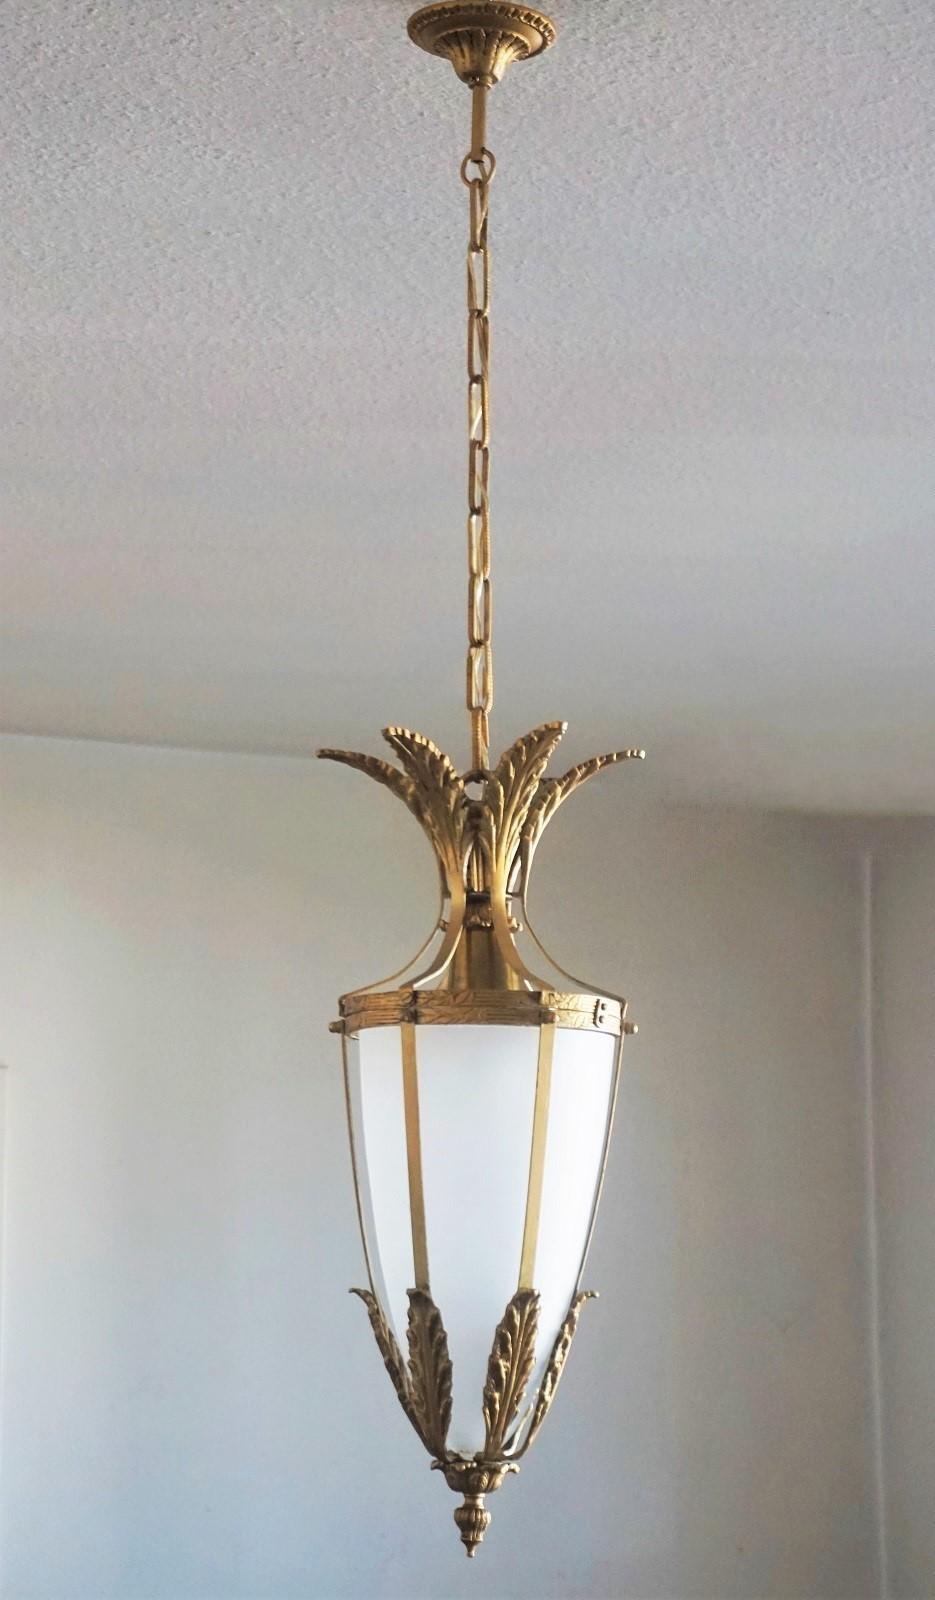 Pair of beautiful and elegant Art Deco lanterns, Italy, 1930-1939. Solid bronze parcel brass with cone shaped satin glass shade.
Each lantern takes one E27 large sized bulb up to 100watt.
Dimensions:
Total height with chain 39